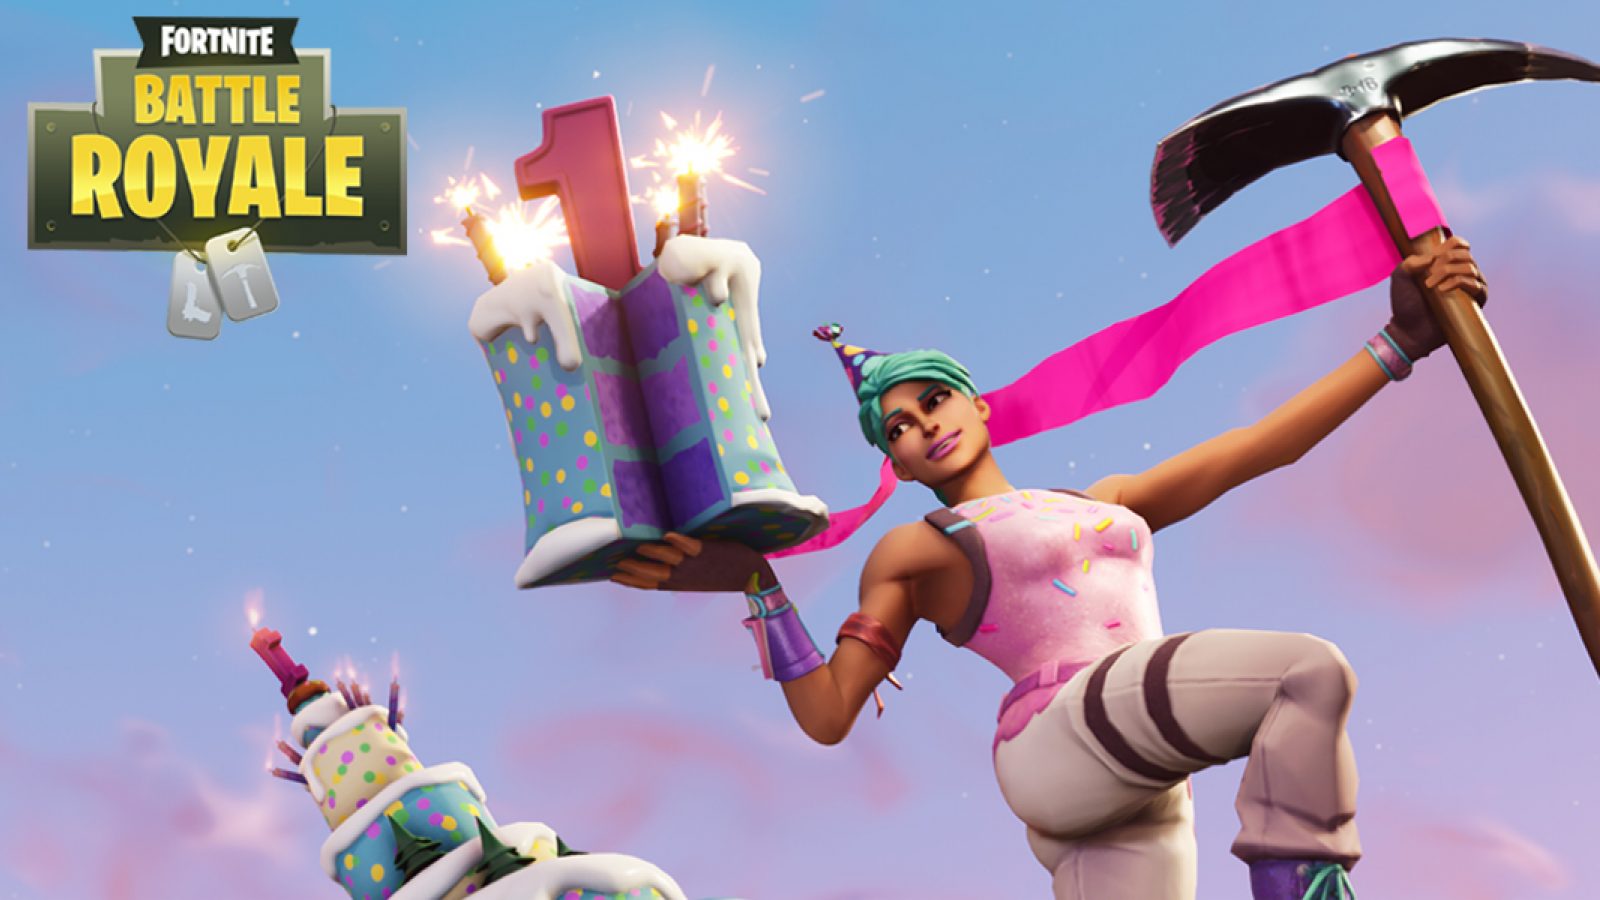 Fortnite is hosting a birthday event starting July 24